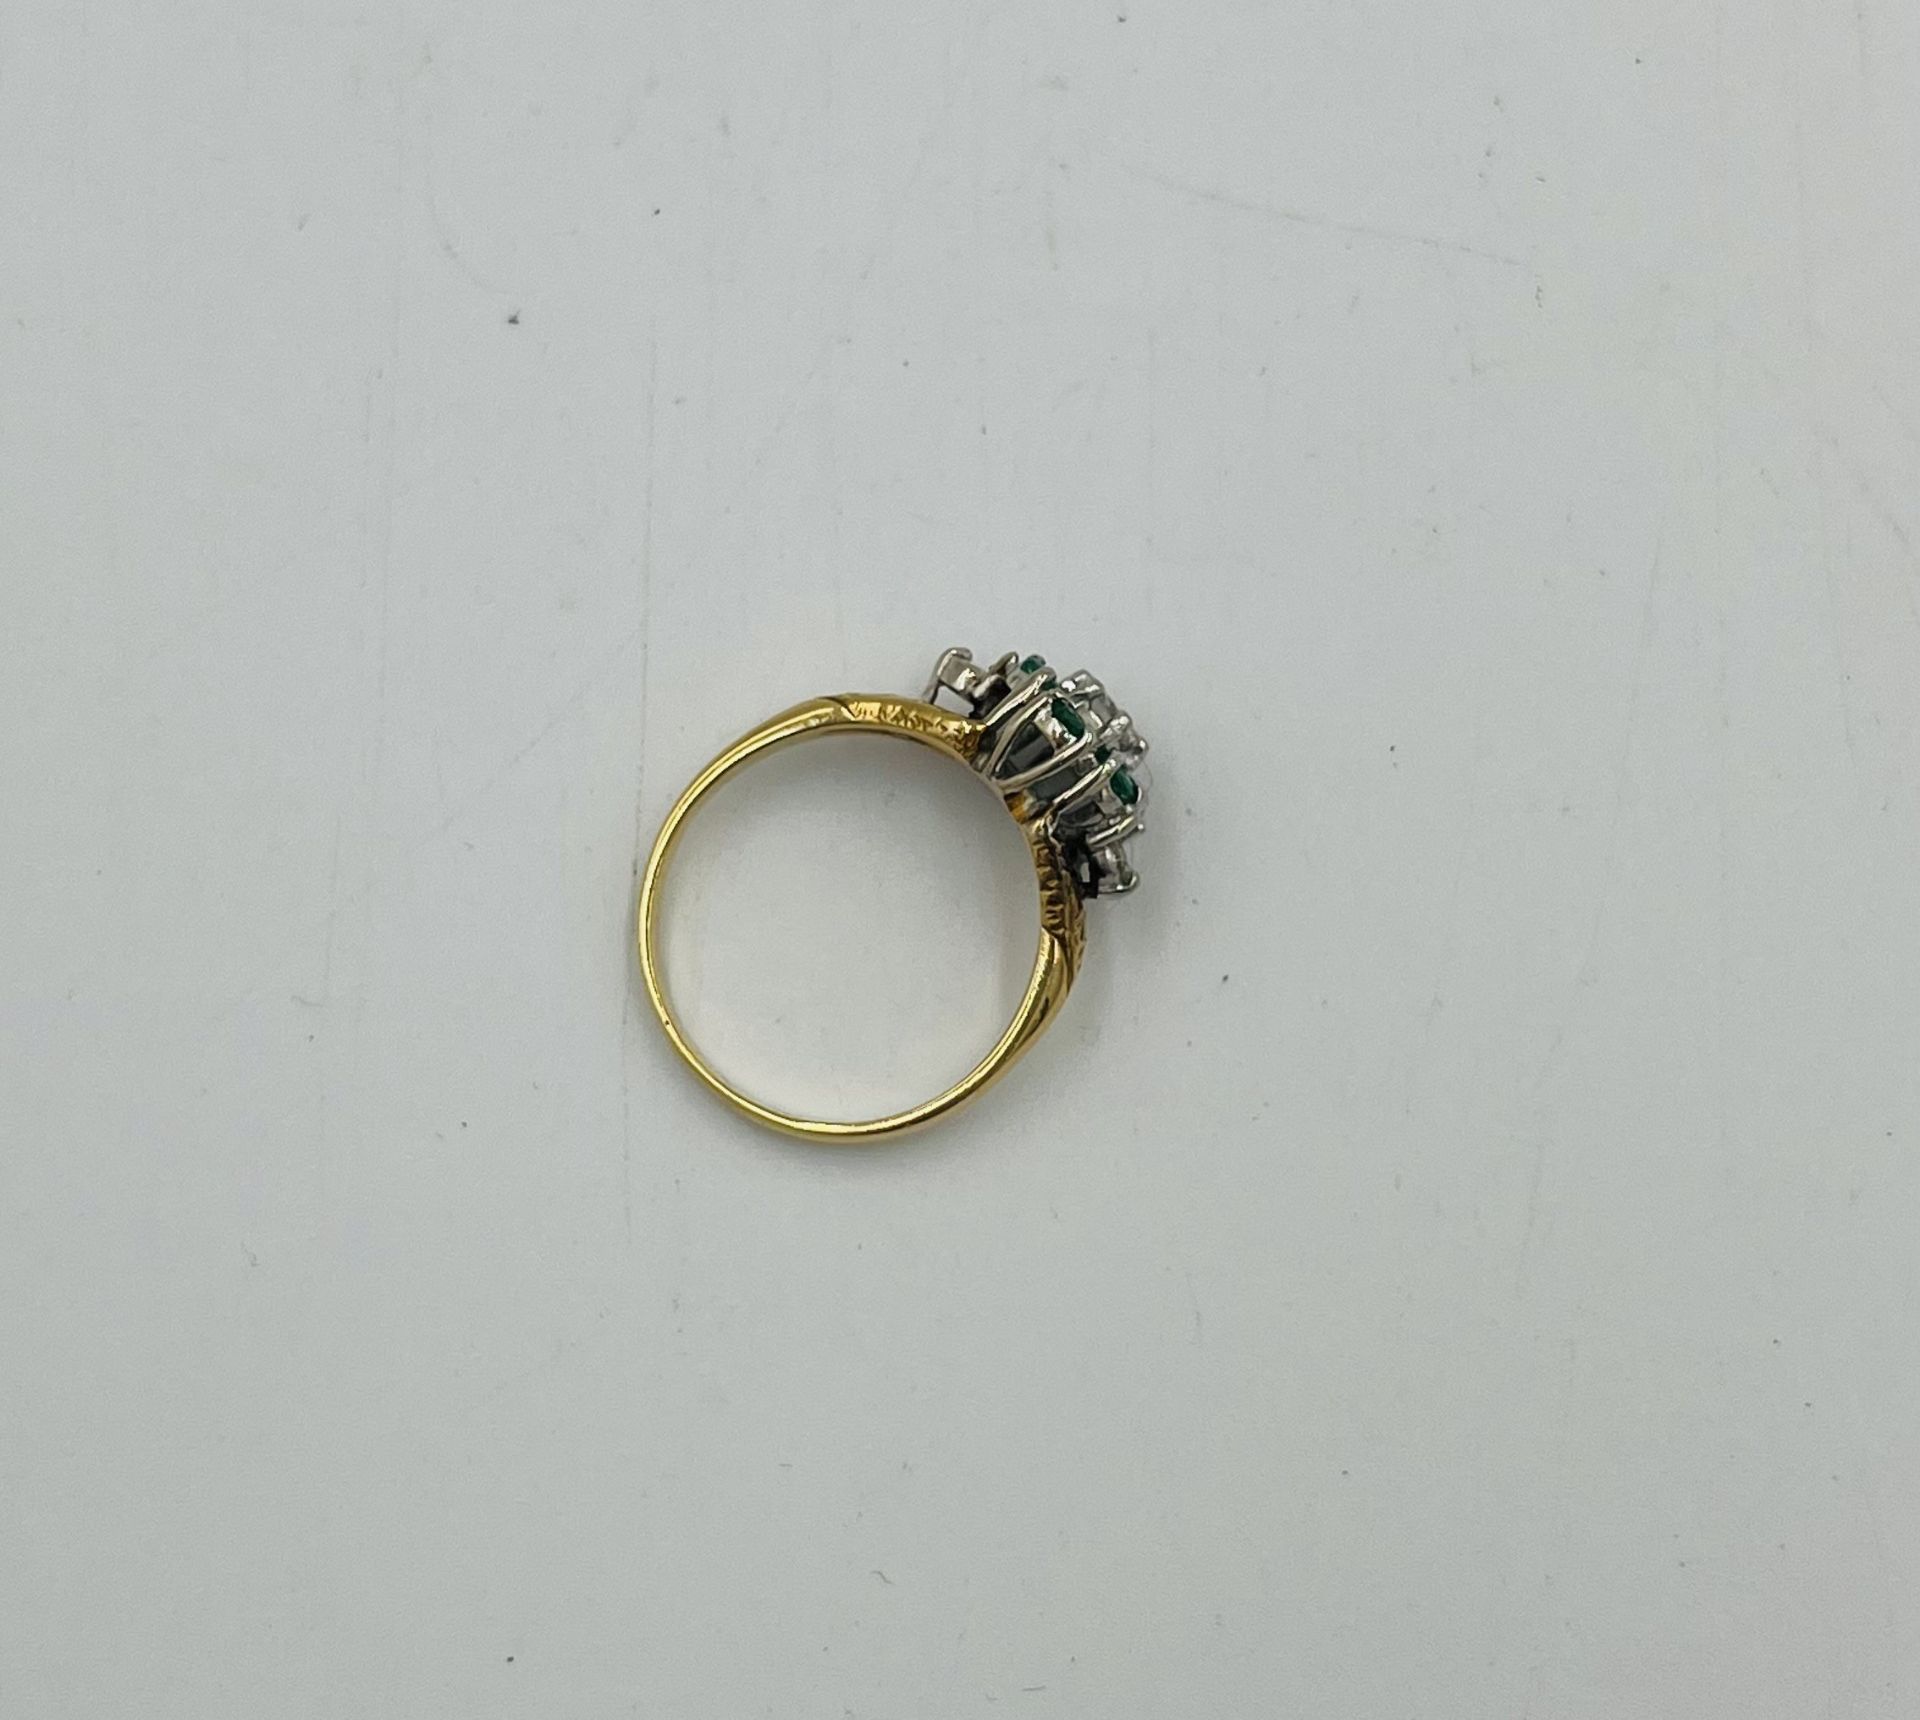 18ct gold ring set with diamonds and emeralds - Image 5 of 5